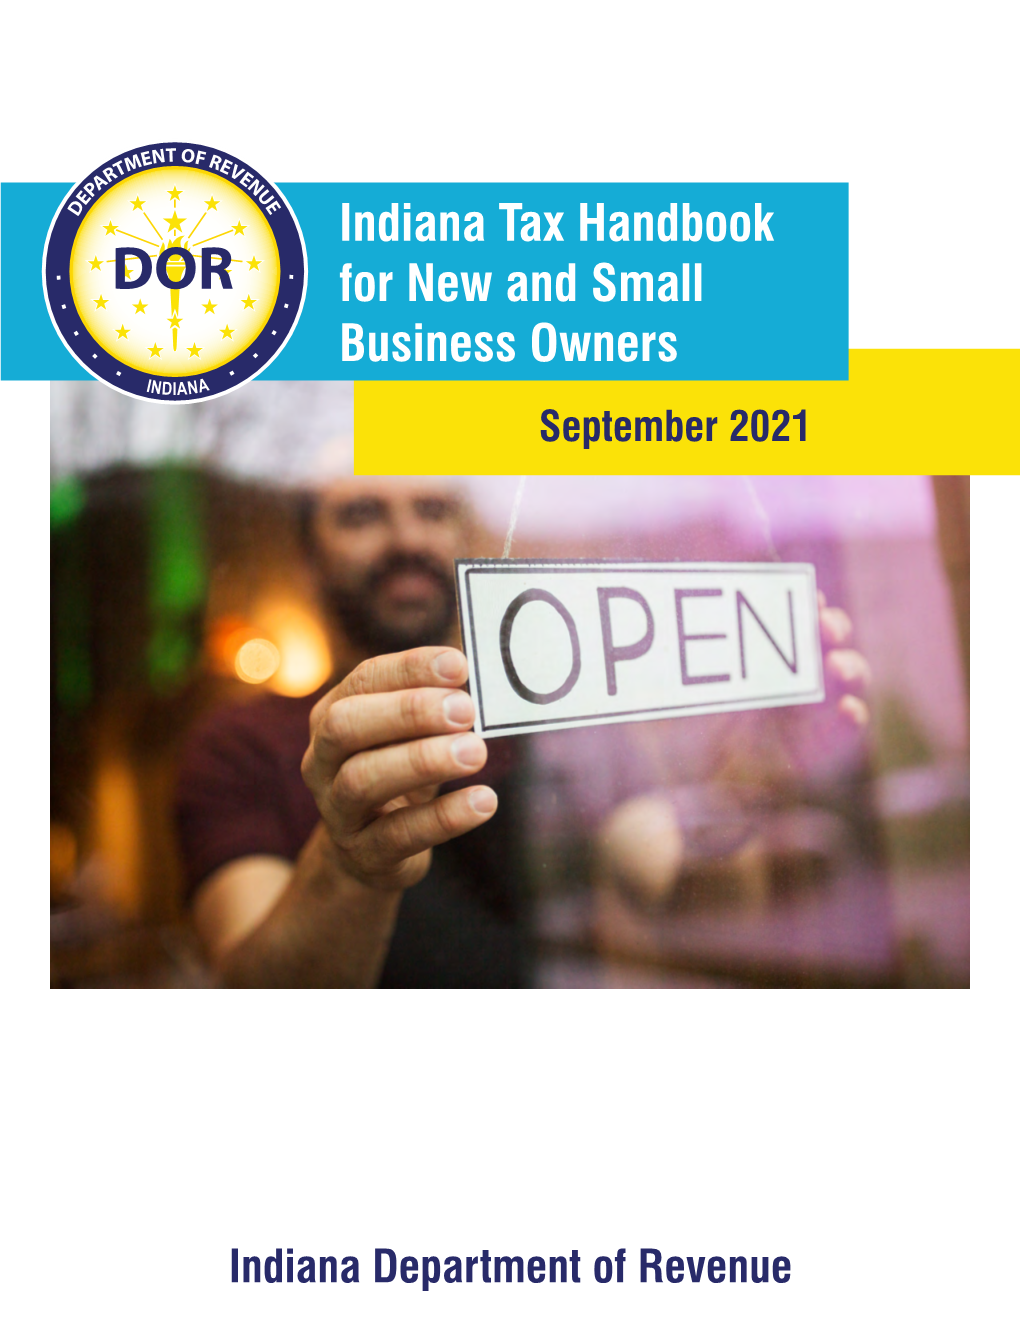 Indiana Tax Handbook for New and Small Business Owners September 2021